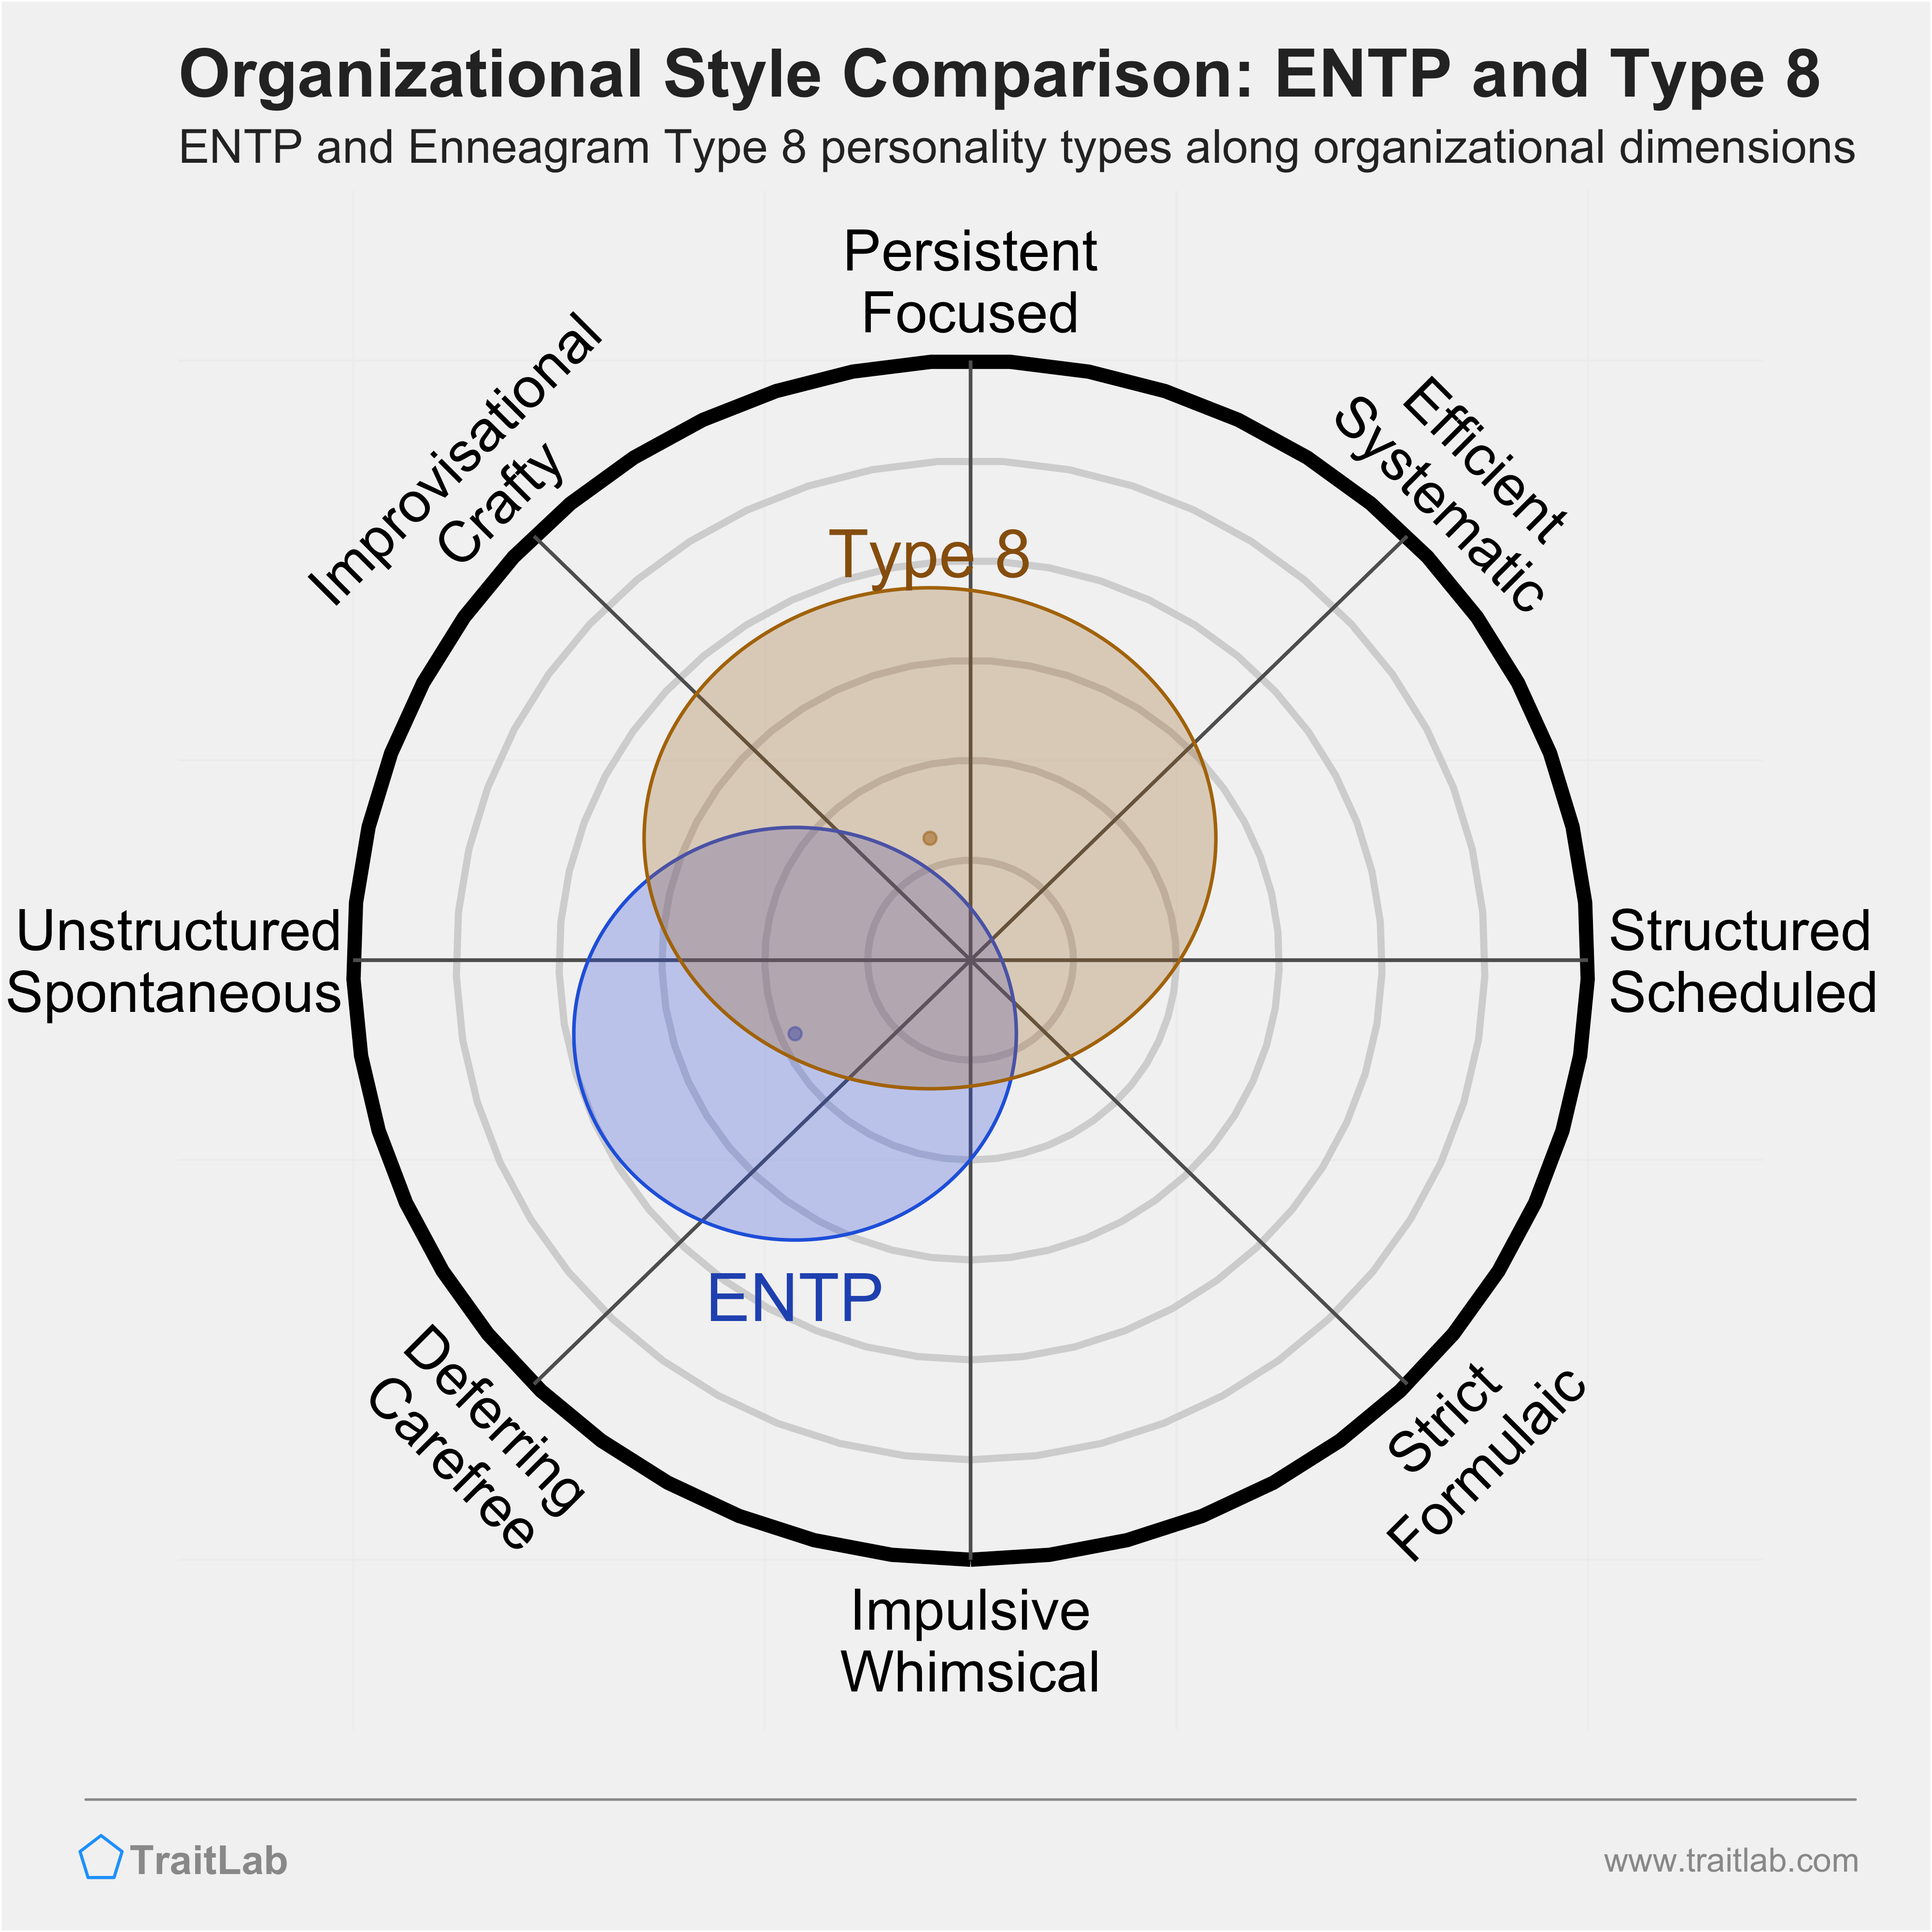 ENTP and Type 8 comparison across organizational dimensions